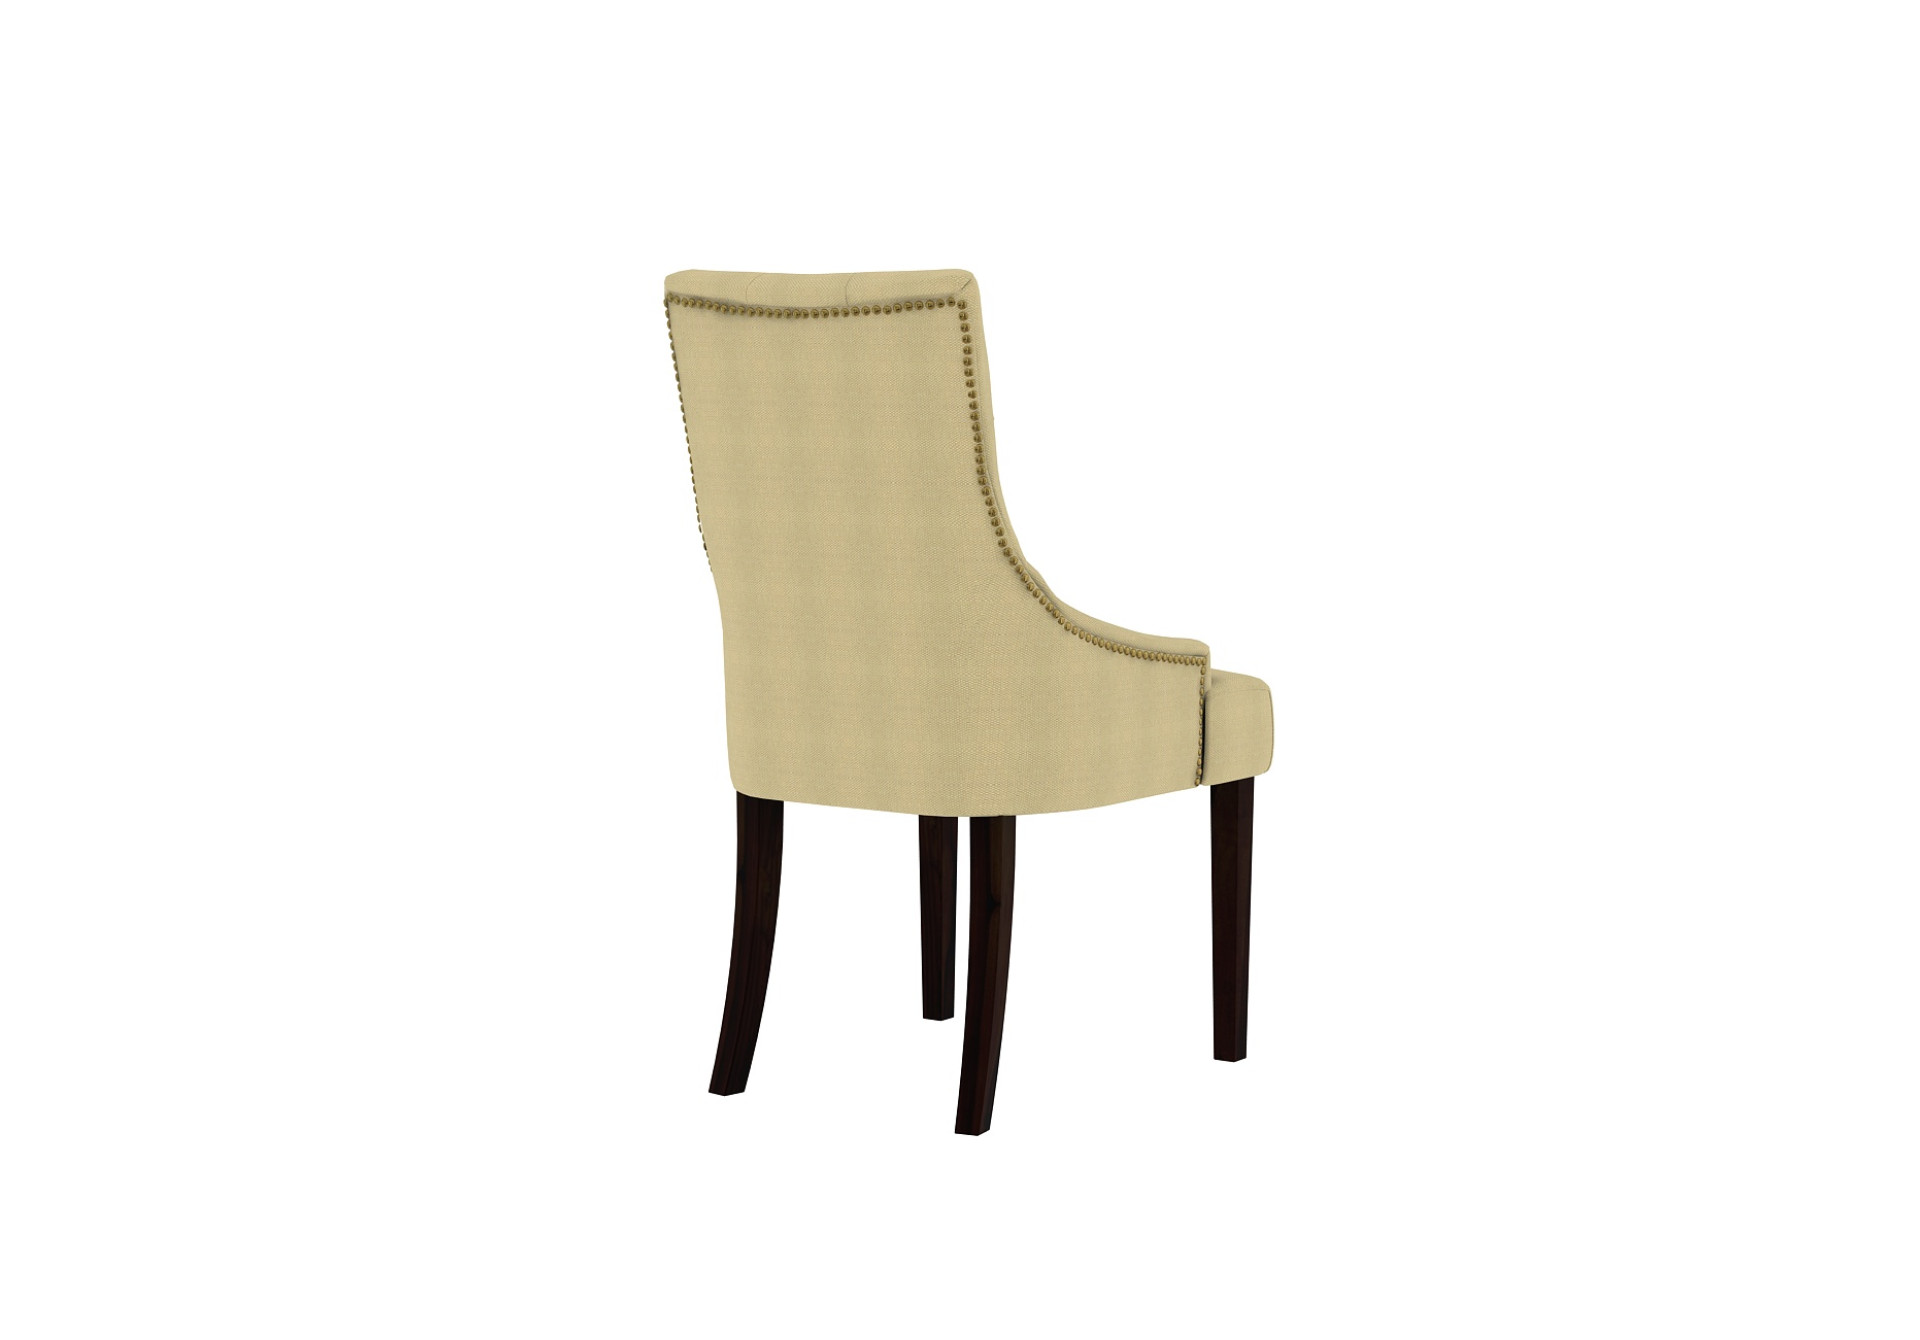 Knit Dining Chair - Set Of 2 (Cotton, Sepia Cream)